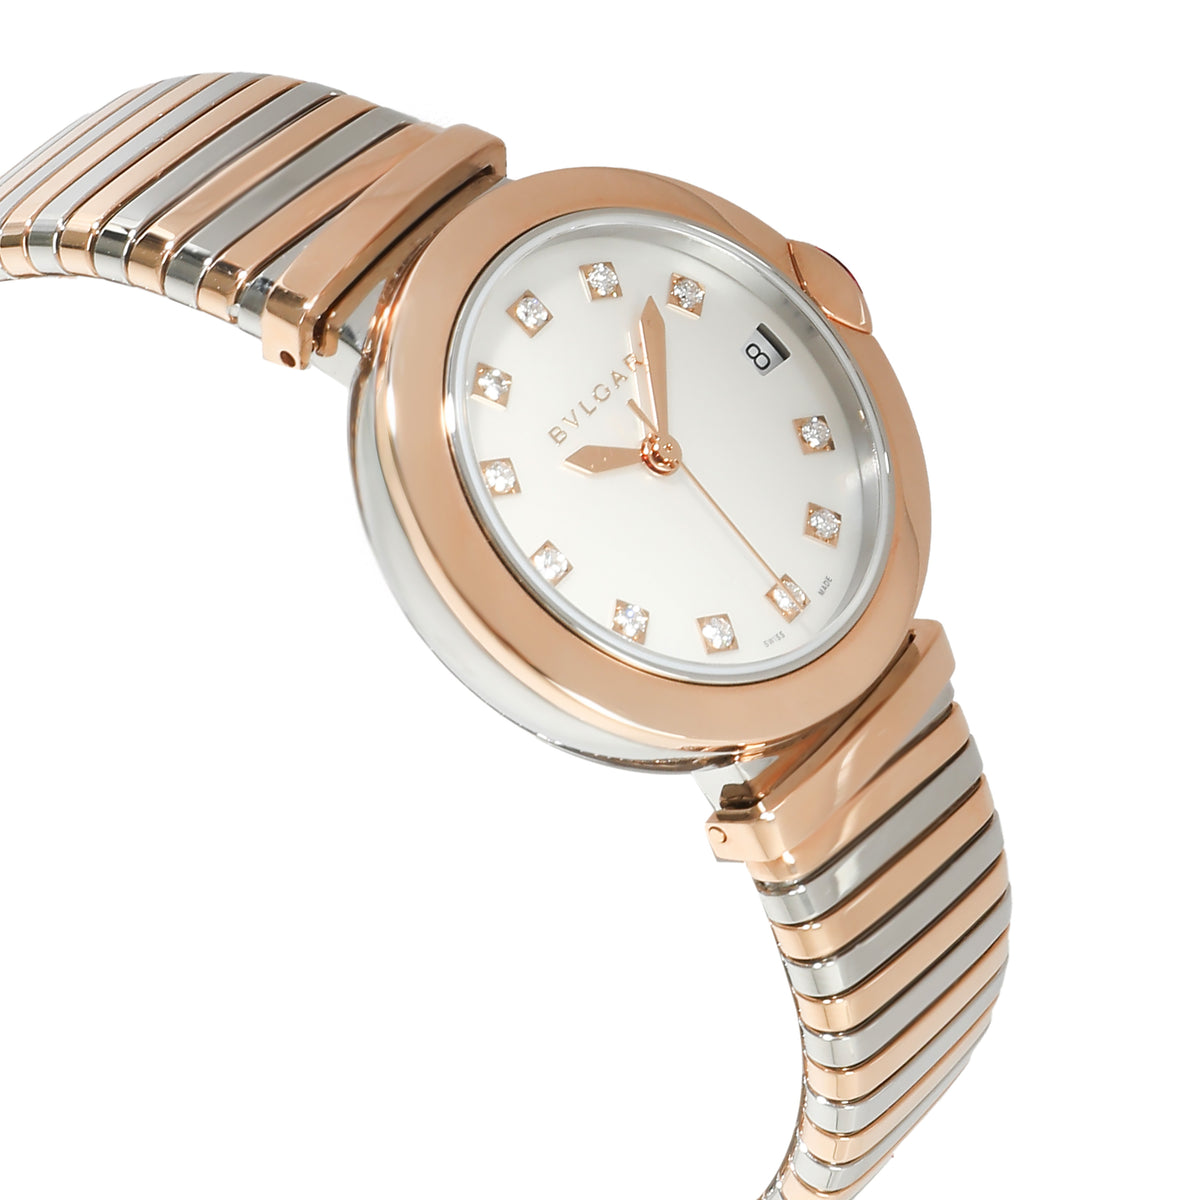 Lvcea Tubogas 102954 Unisex Watch in 18kt Stainless Steel/Rose Gold